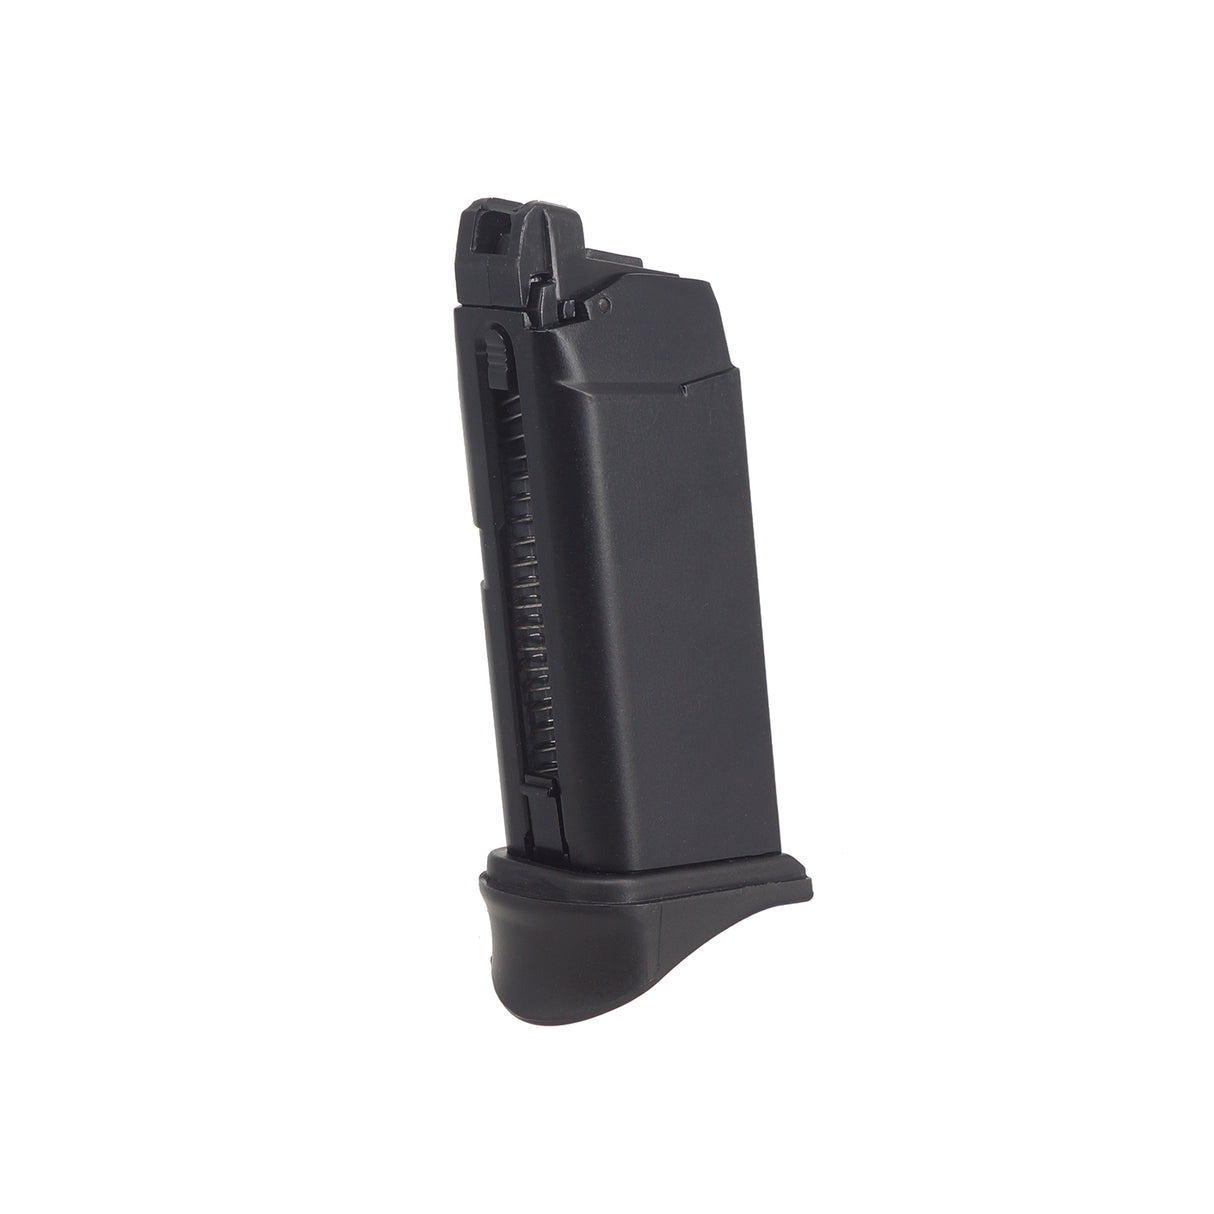 Double Bell 14 Rds Gas Magazine for G26 GBB ( DB-724J )